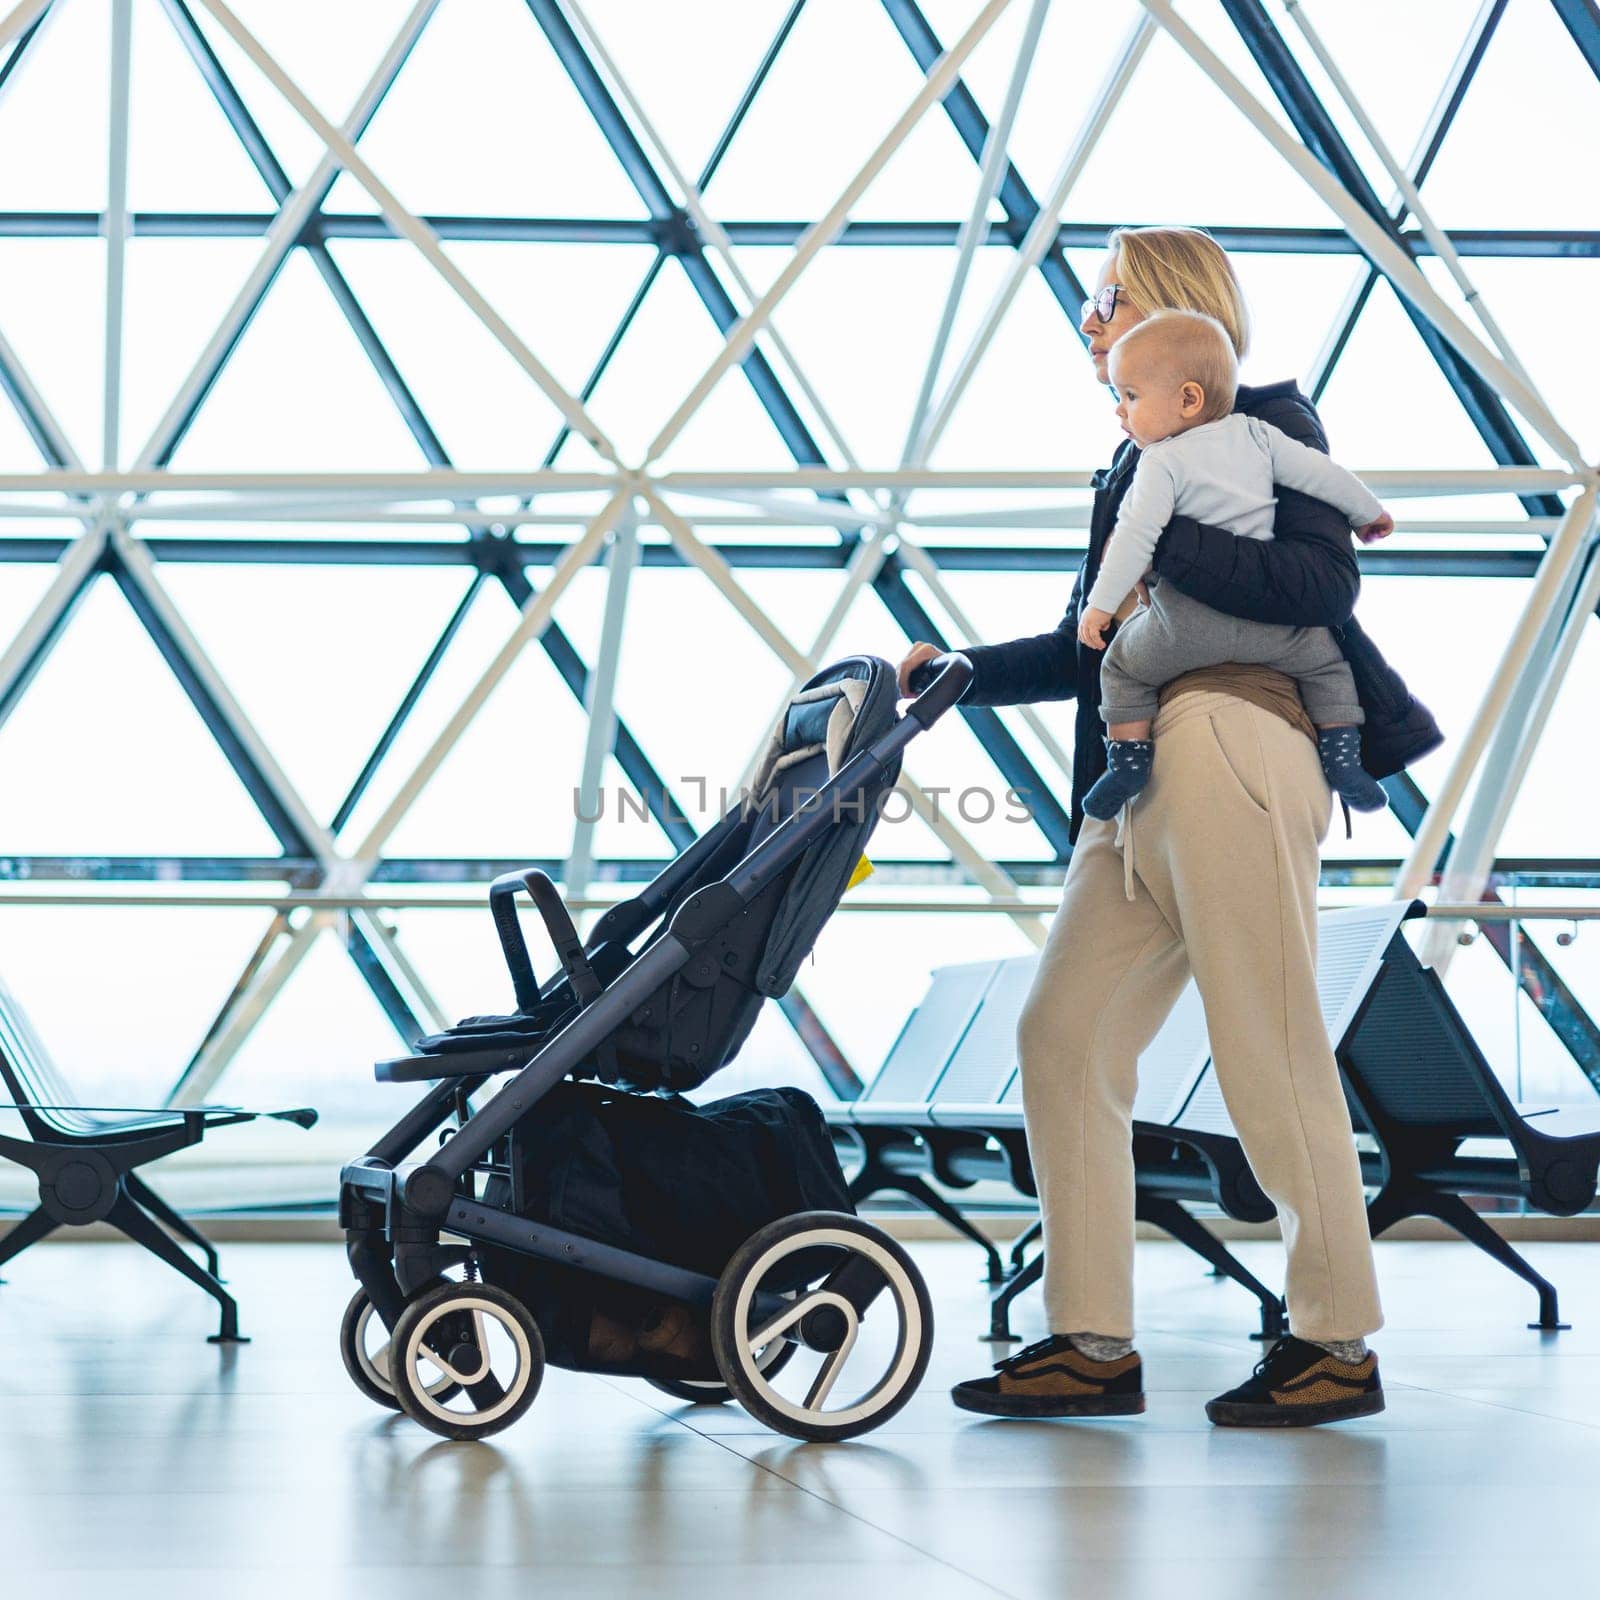 Mother carying his infant baby boy child, pushing stroller at airport departure terminal moving to boarding gates to board an airplane. Family travel with baby concept